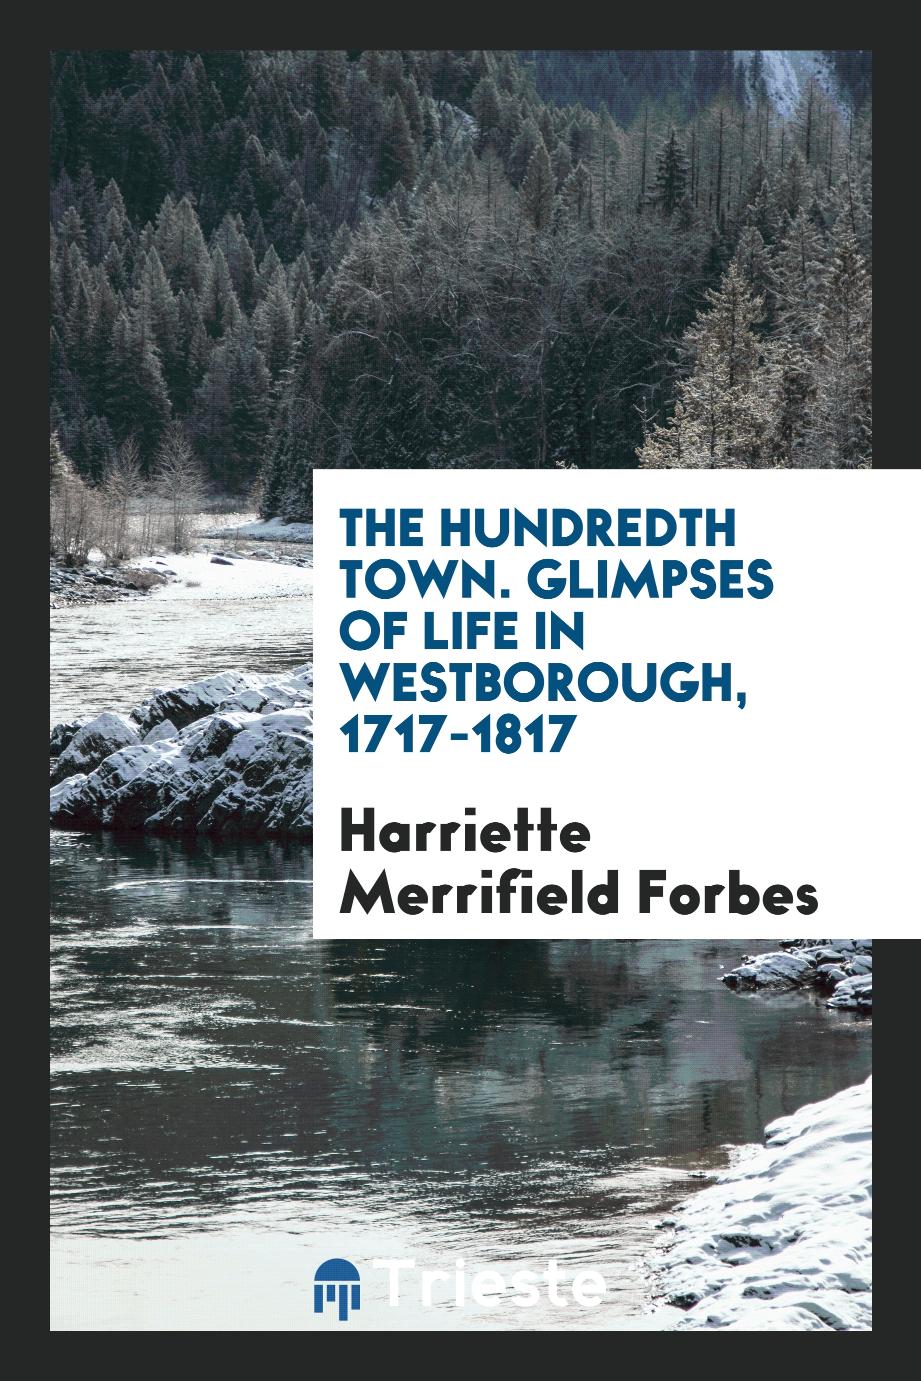 The hundredth town. Glimpses of life in Westborough, 1717-1817